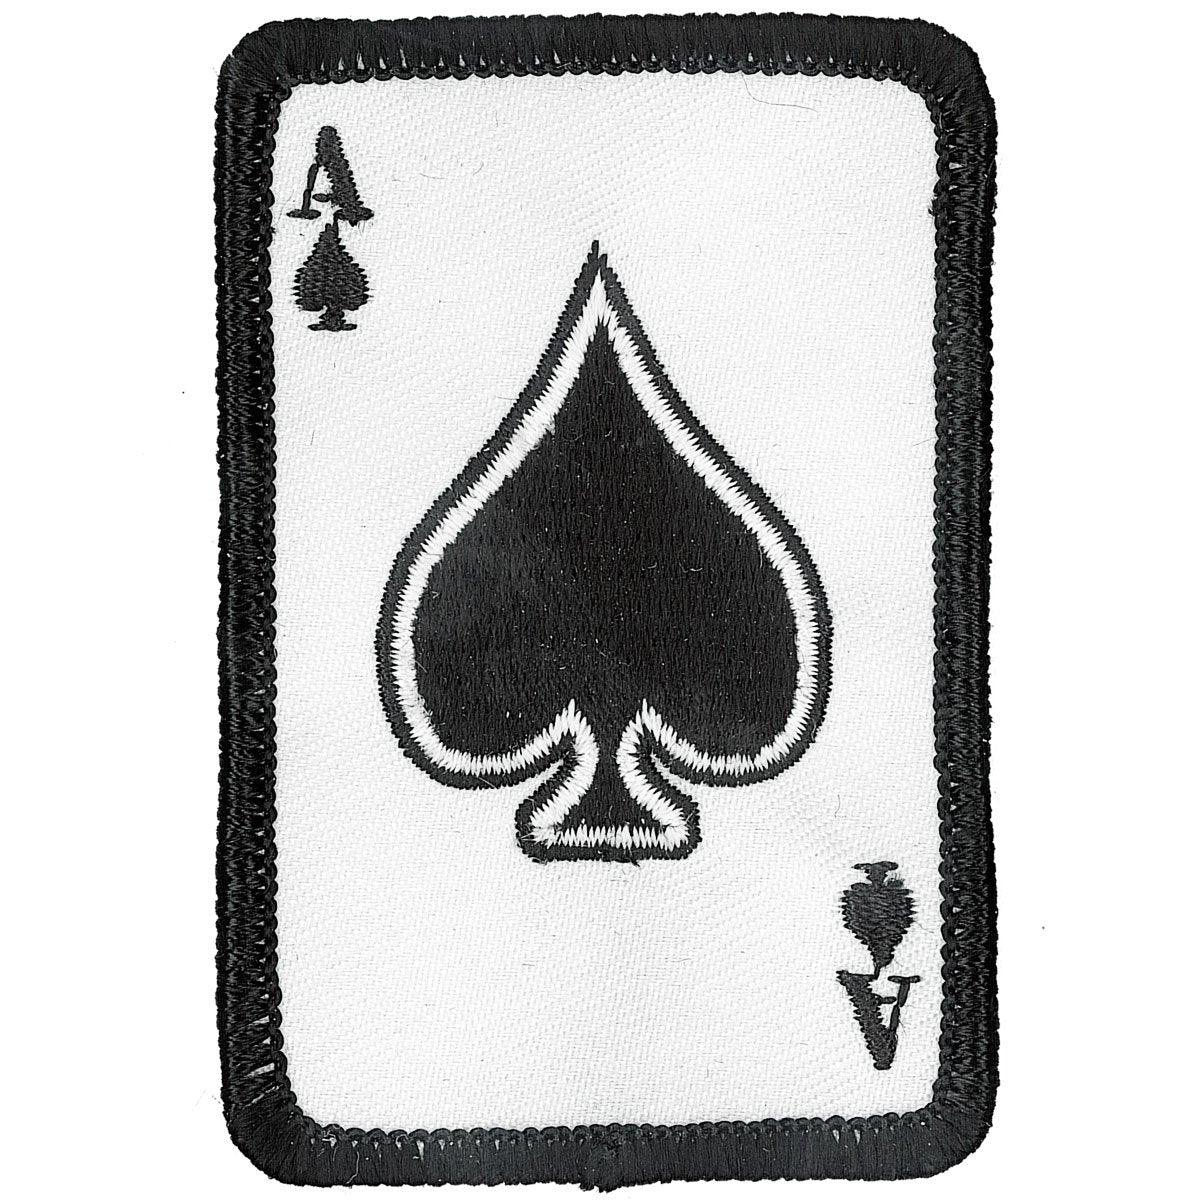 Hot Leathers Ace Of Spades 2" X 3" Patch - American Legend Rider